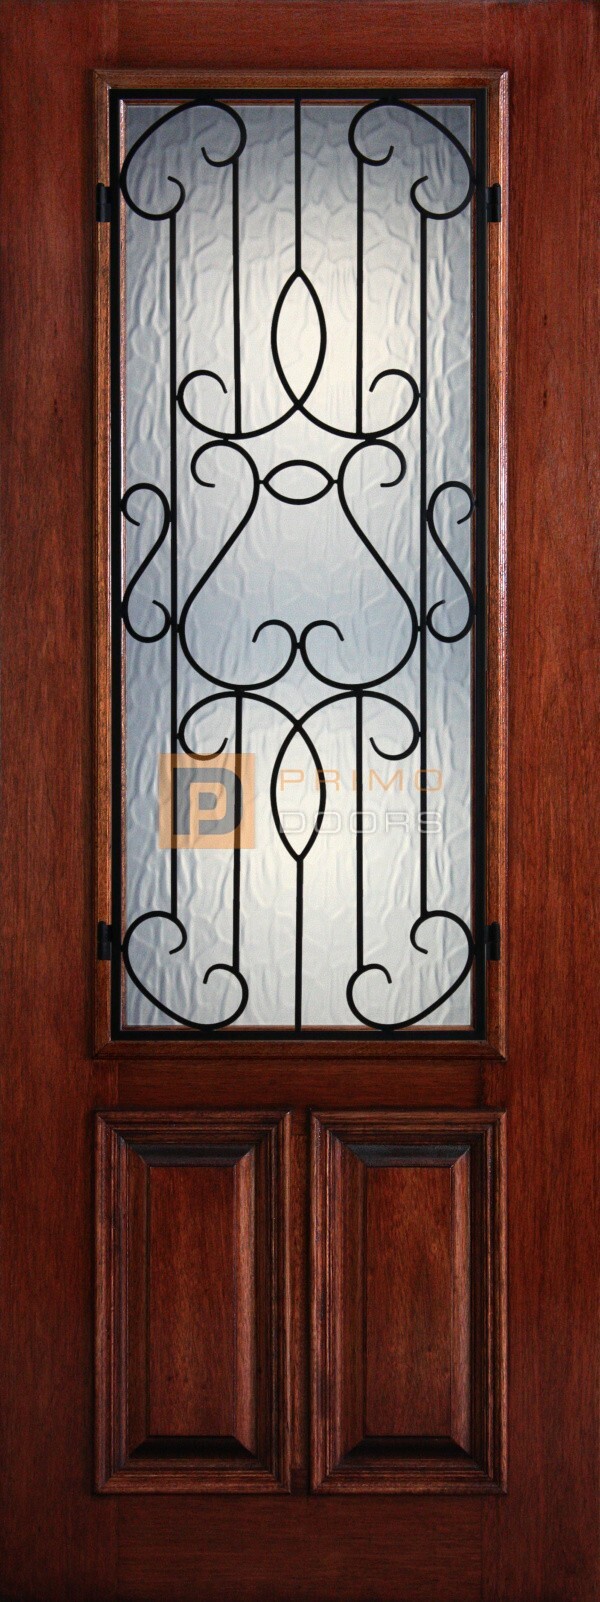 8′ 2/3 Lite Decorative Glass with Iron Grill - Mahogany Single Front Door – PD 3080-23 BARC